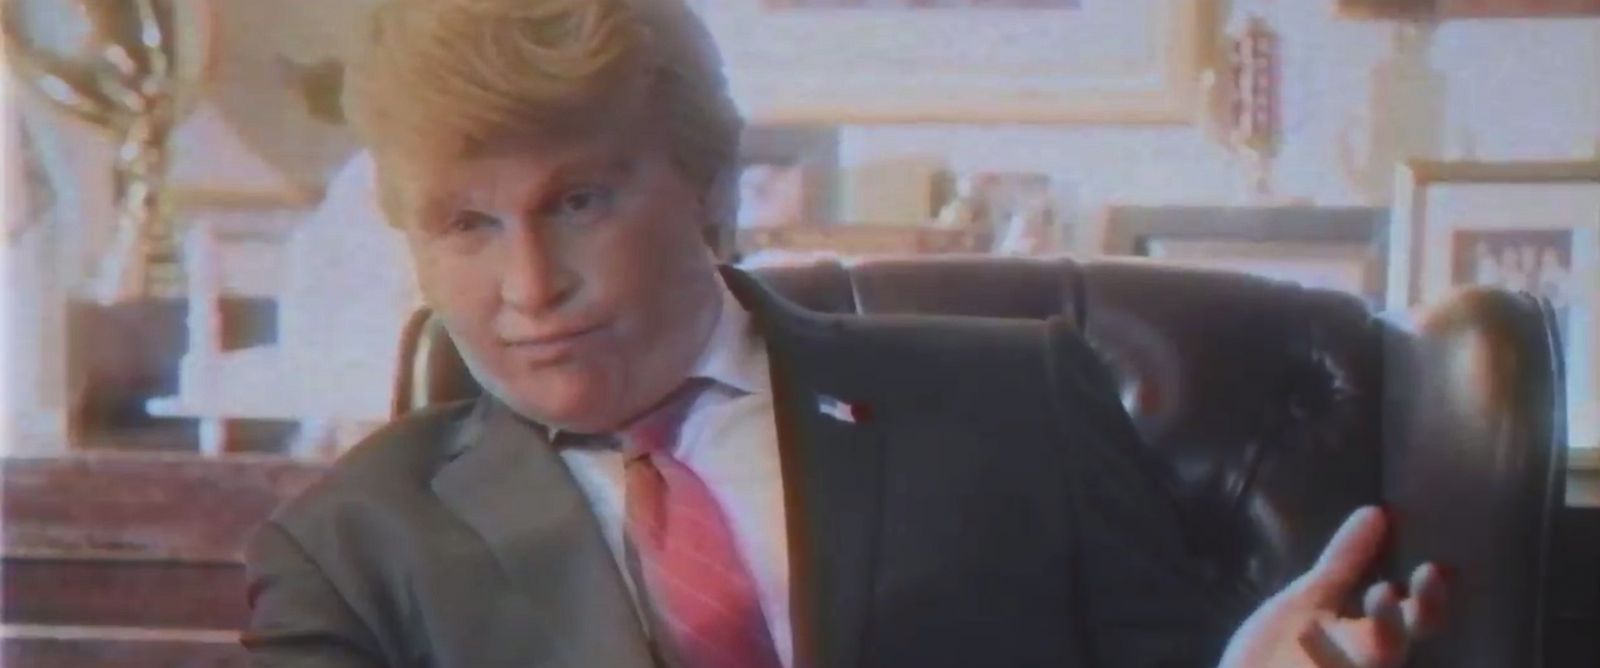 Funny or die trump movie coming to netflix in august